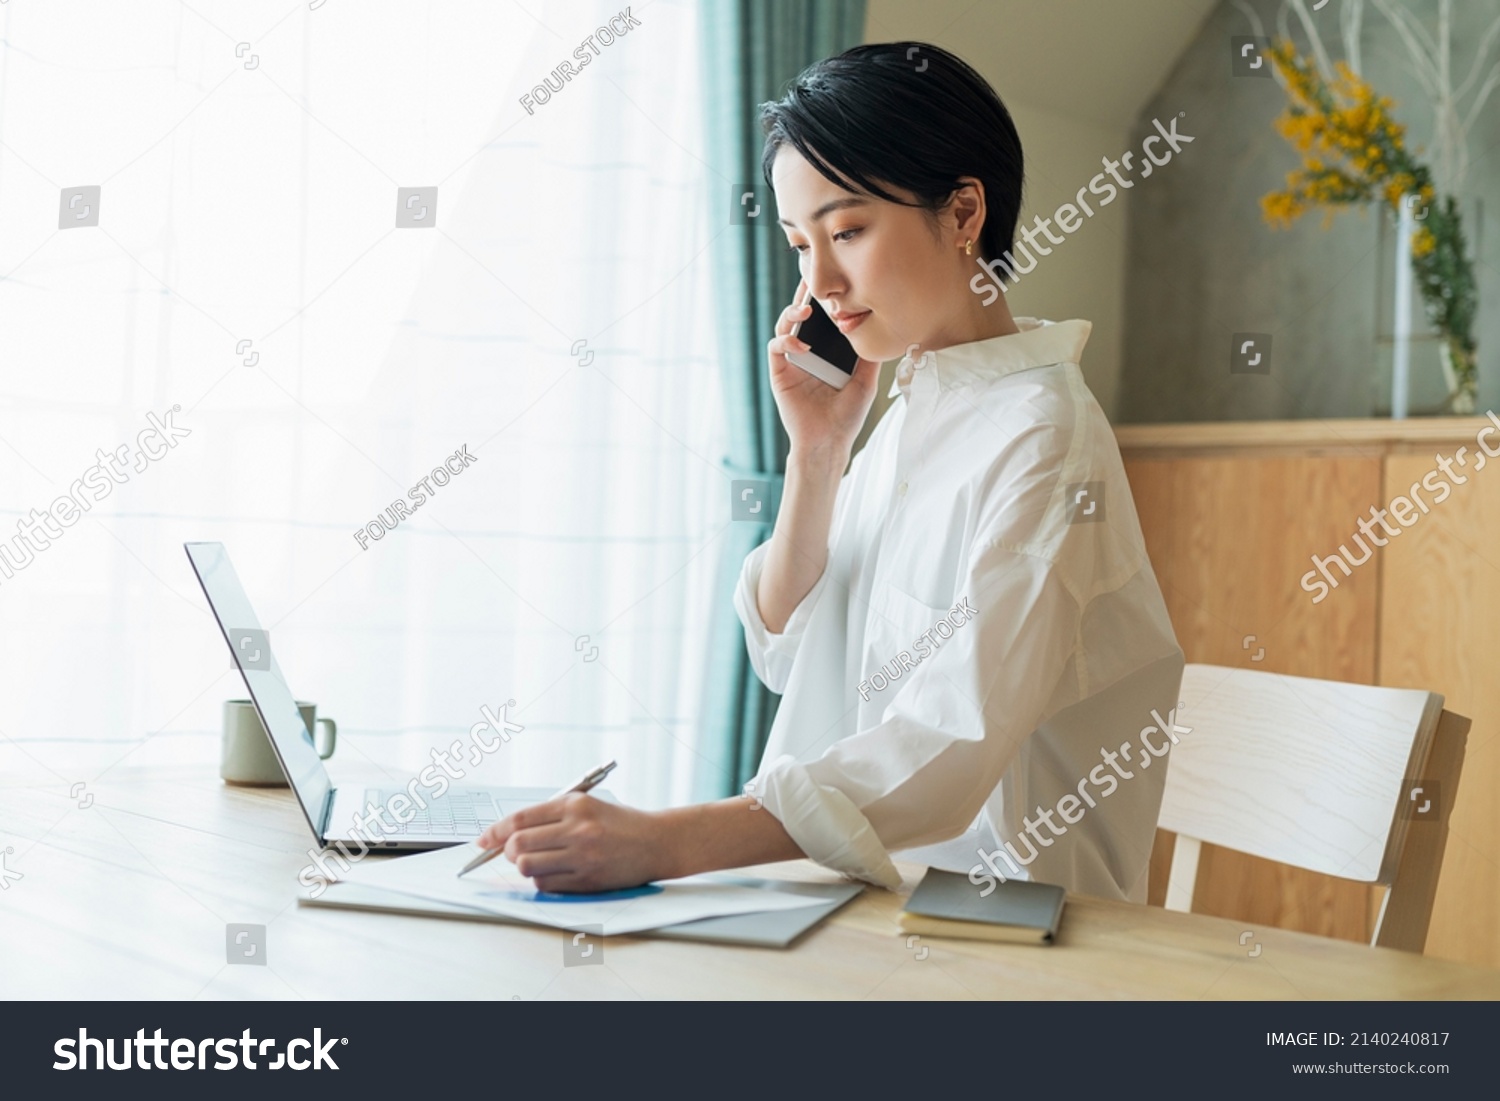 Woman making a phone call while working remotely #2140240817